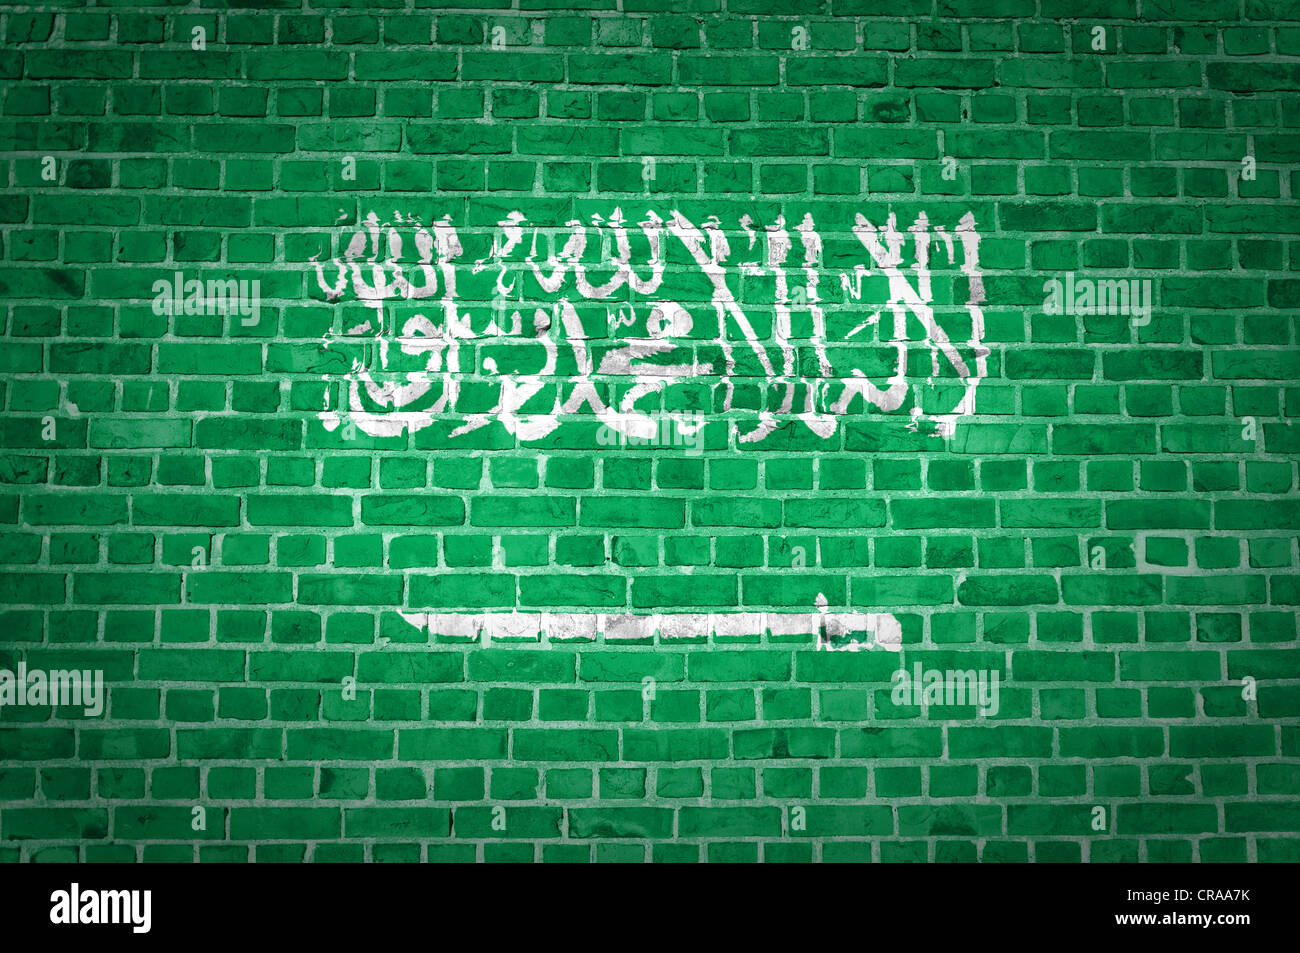 An image of the Saudi Arabia flag painted on a brick wall in an urban location Stock Photo